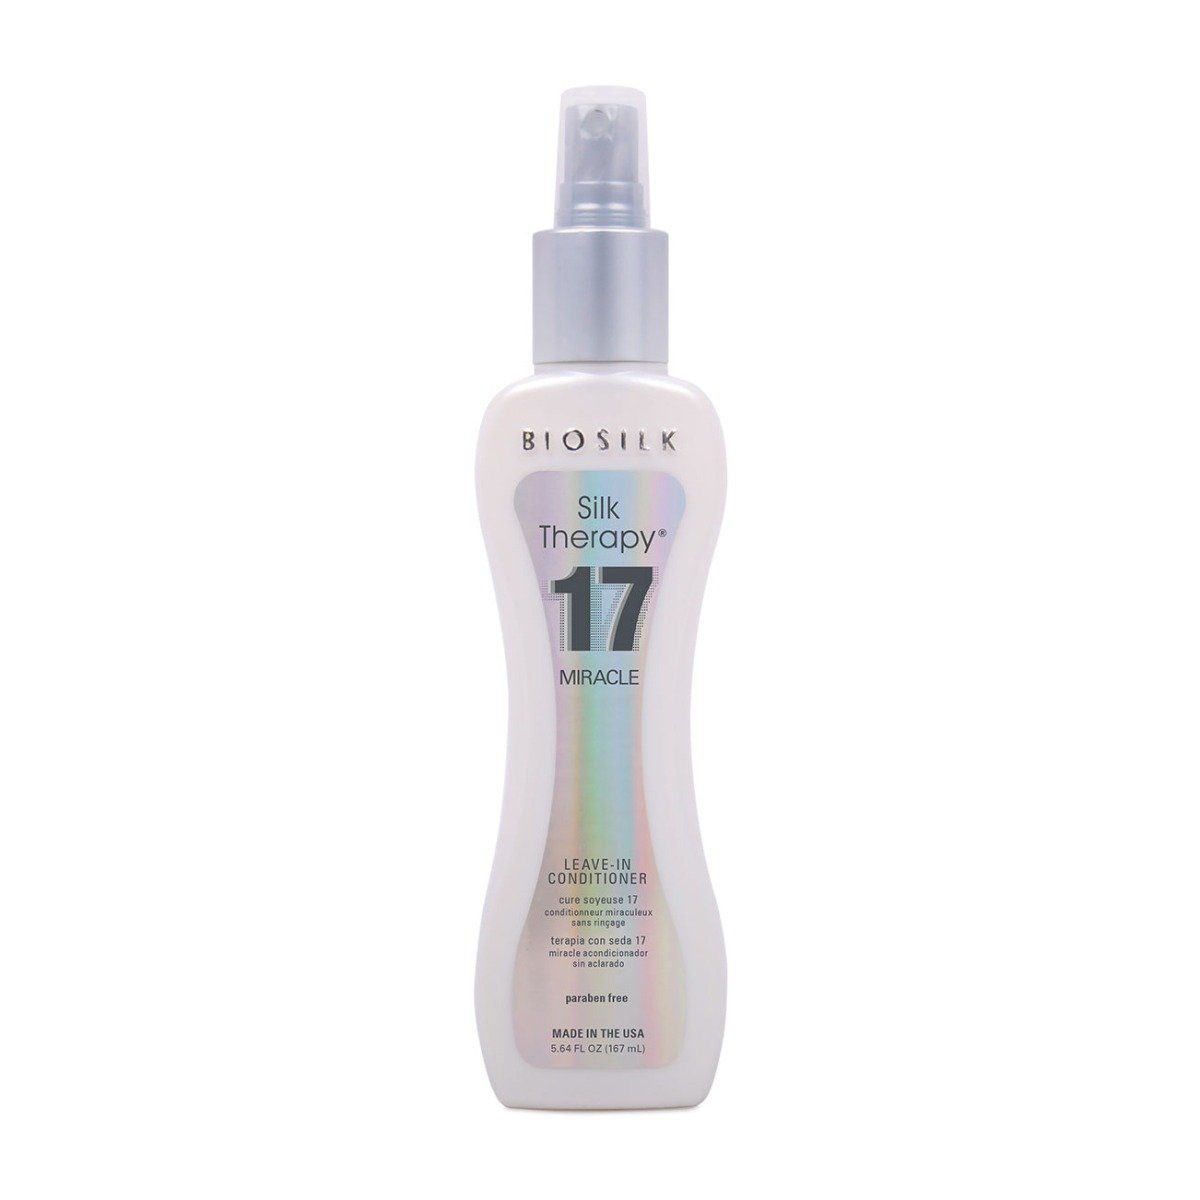 Biosilk Silk Therapy 17 Miracle Leave-in Conditioner - 167ml - Bloom Pharmacy